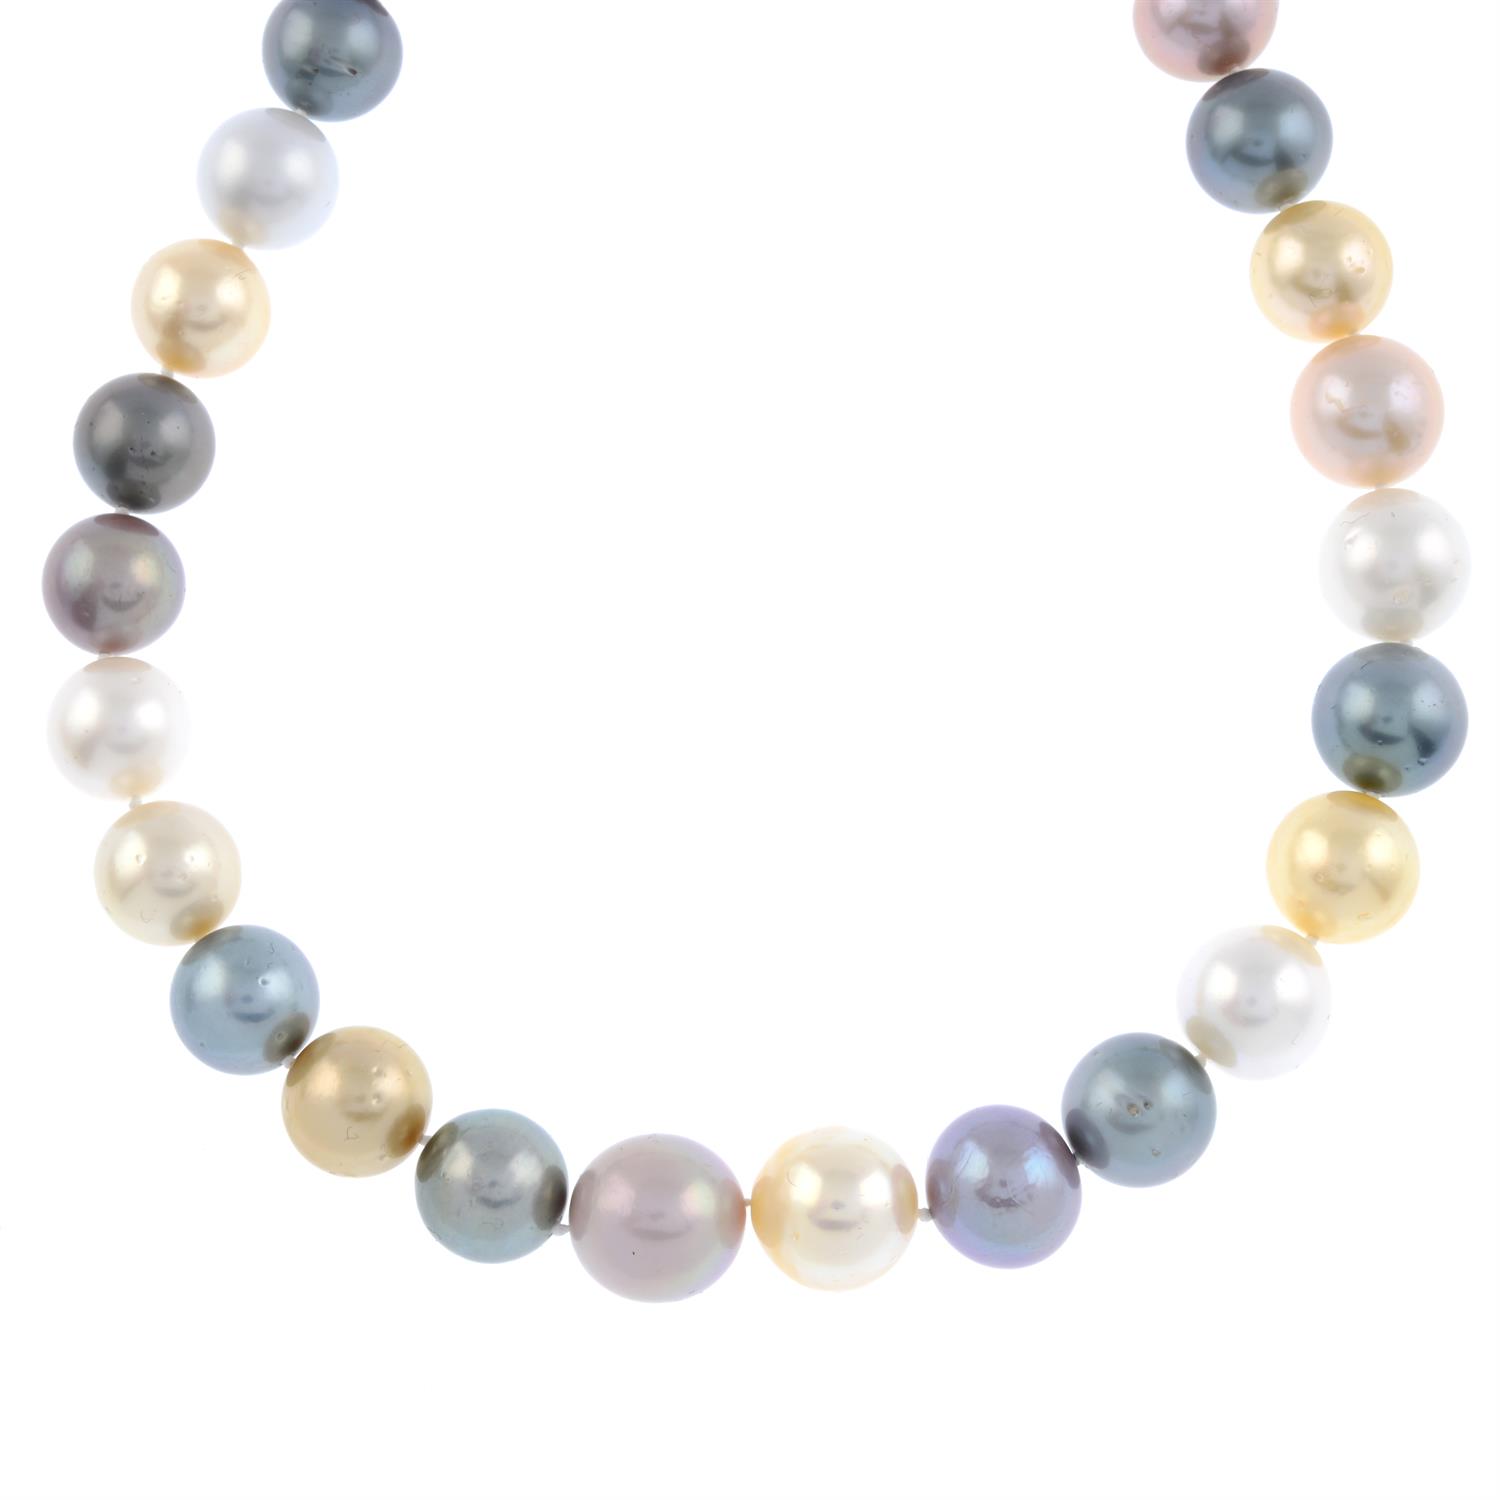 Multi-hue cultured pearl single-strand necklace - Image 3 of 4